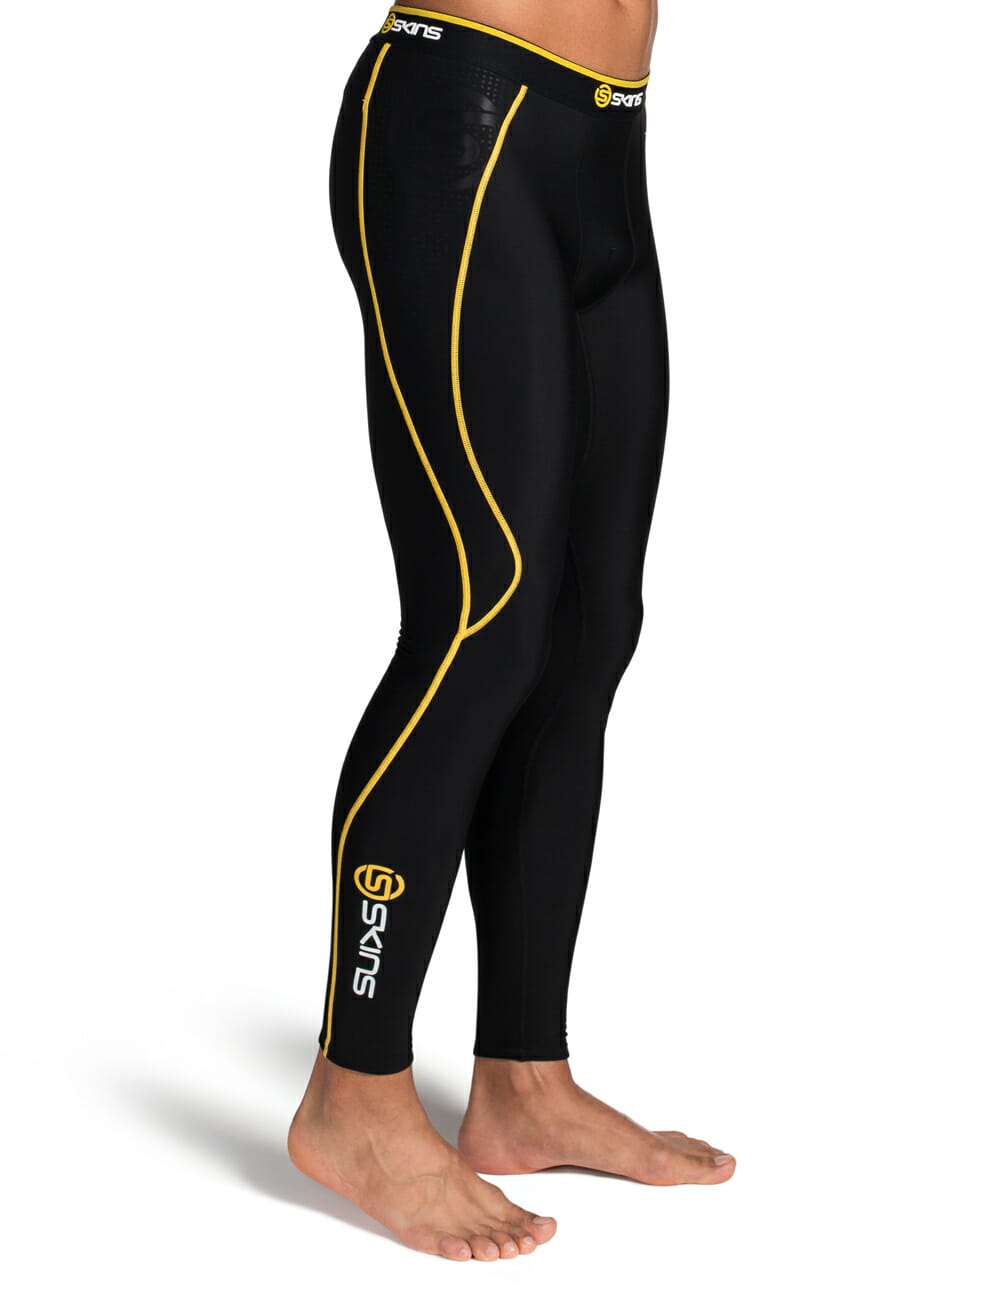 Skins Men's A200 Thermal Compression All-In-One-Body Suit - Black/Neon Blue